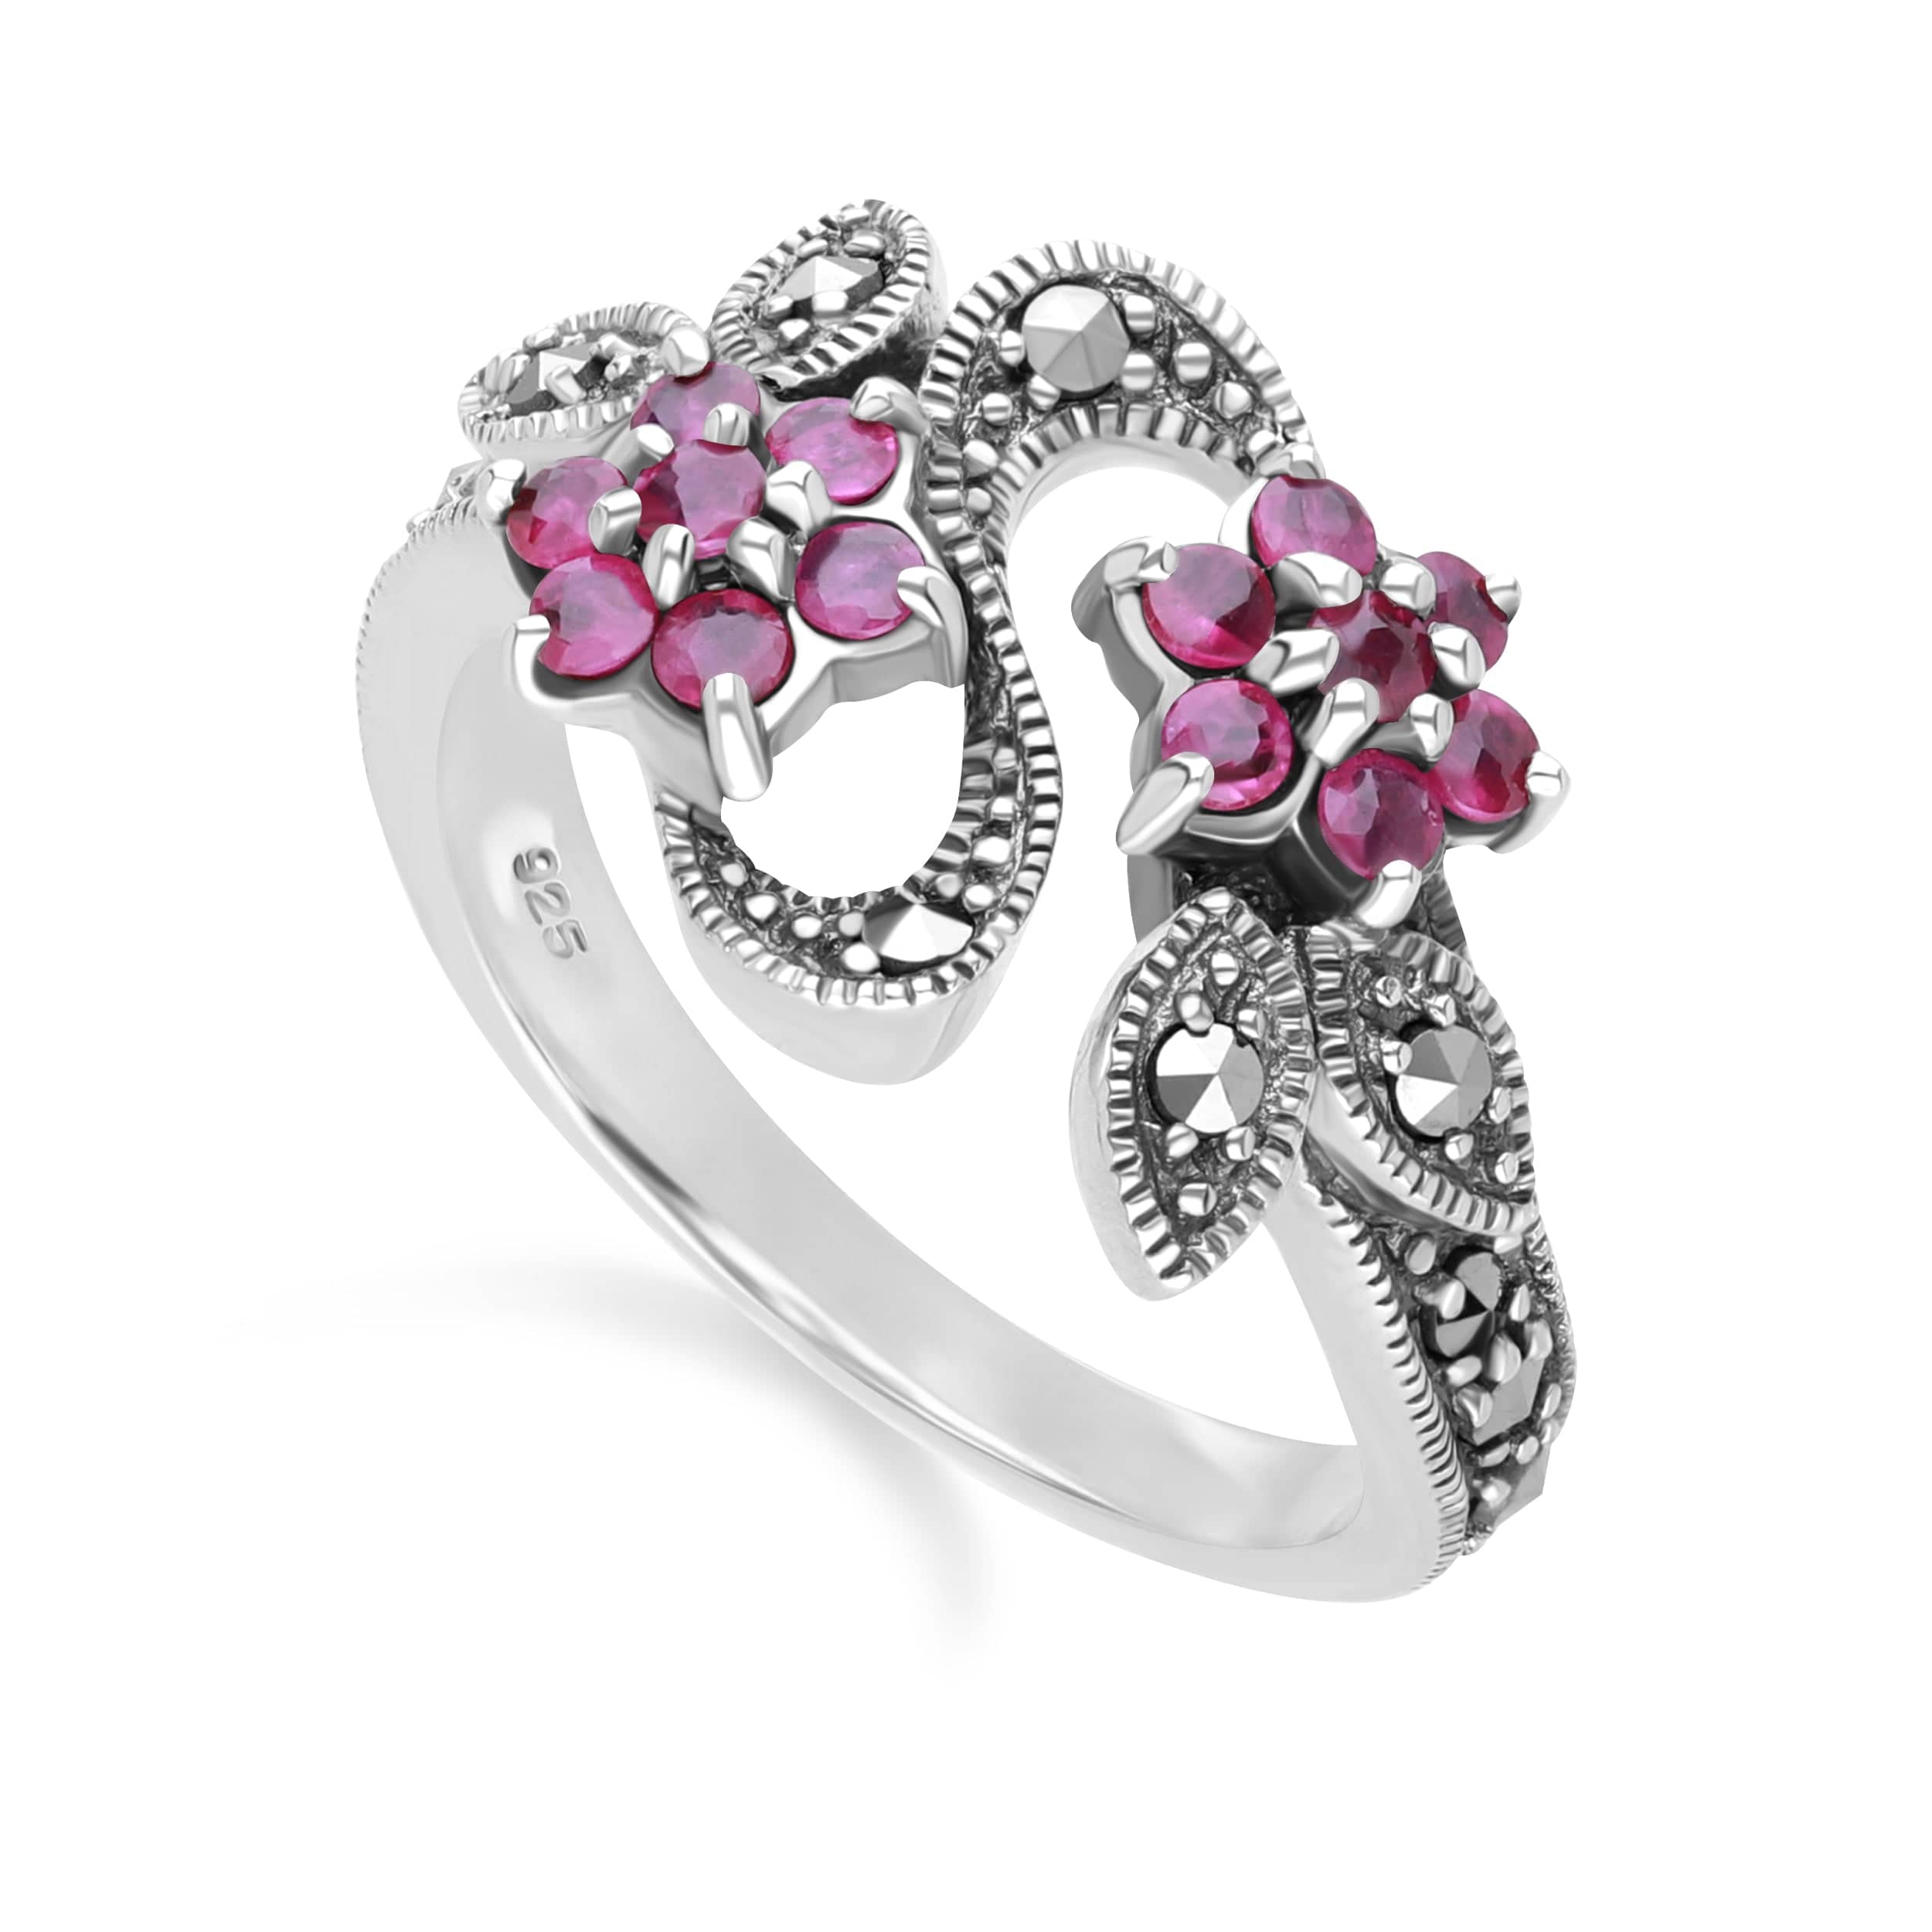 214R247401925 Art Nouveau Style Round Ruby & Marcasite Flower Ring in Sterling Silver 2